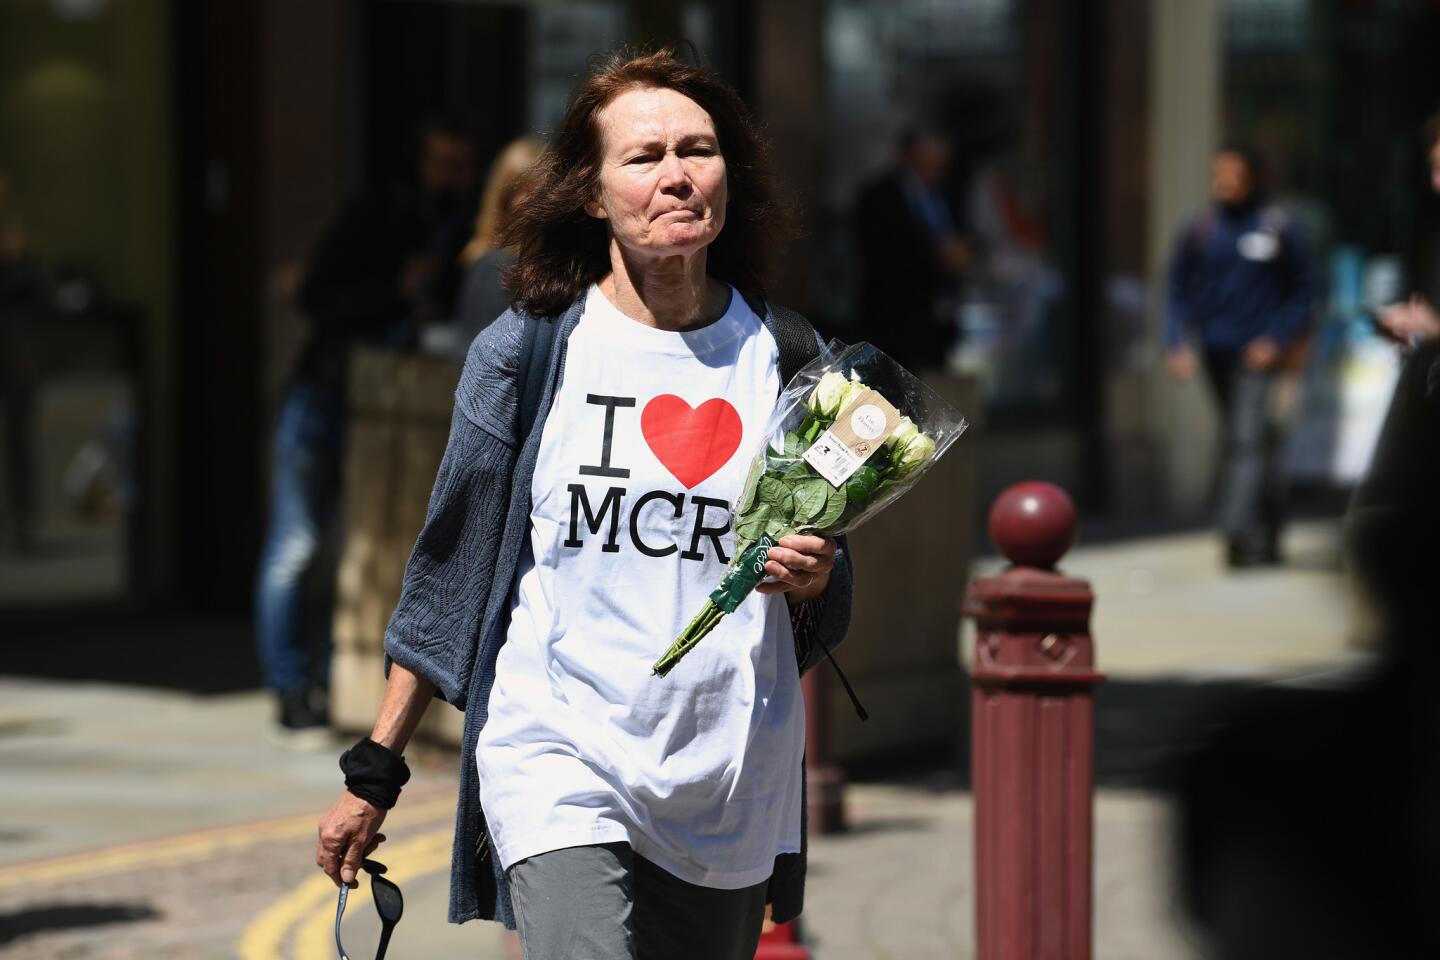 A woman makes her way to lay flowers in St. Ann Square in Manchester, England, on May 23, 2017, to honor the victims of the previous night's terror attack.